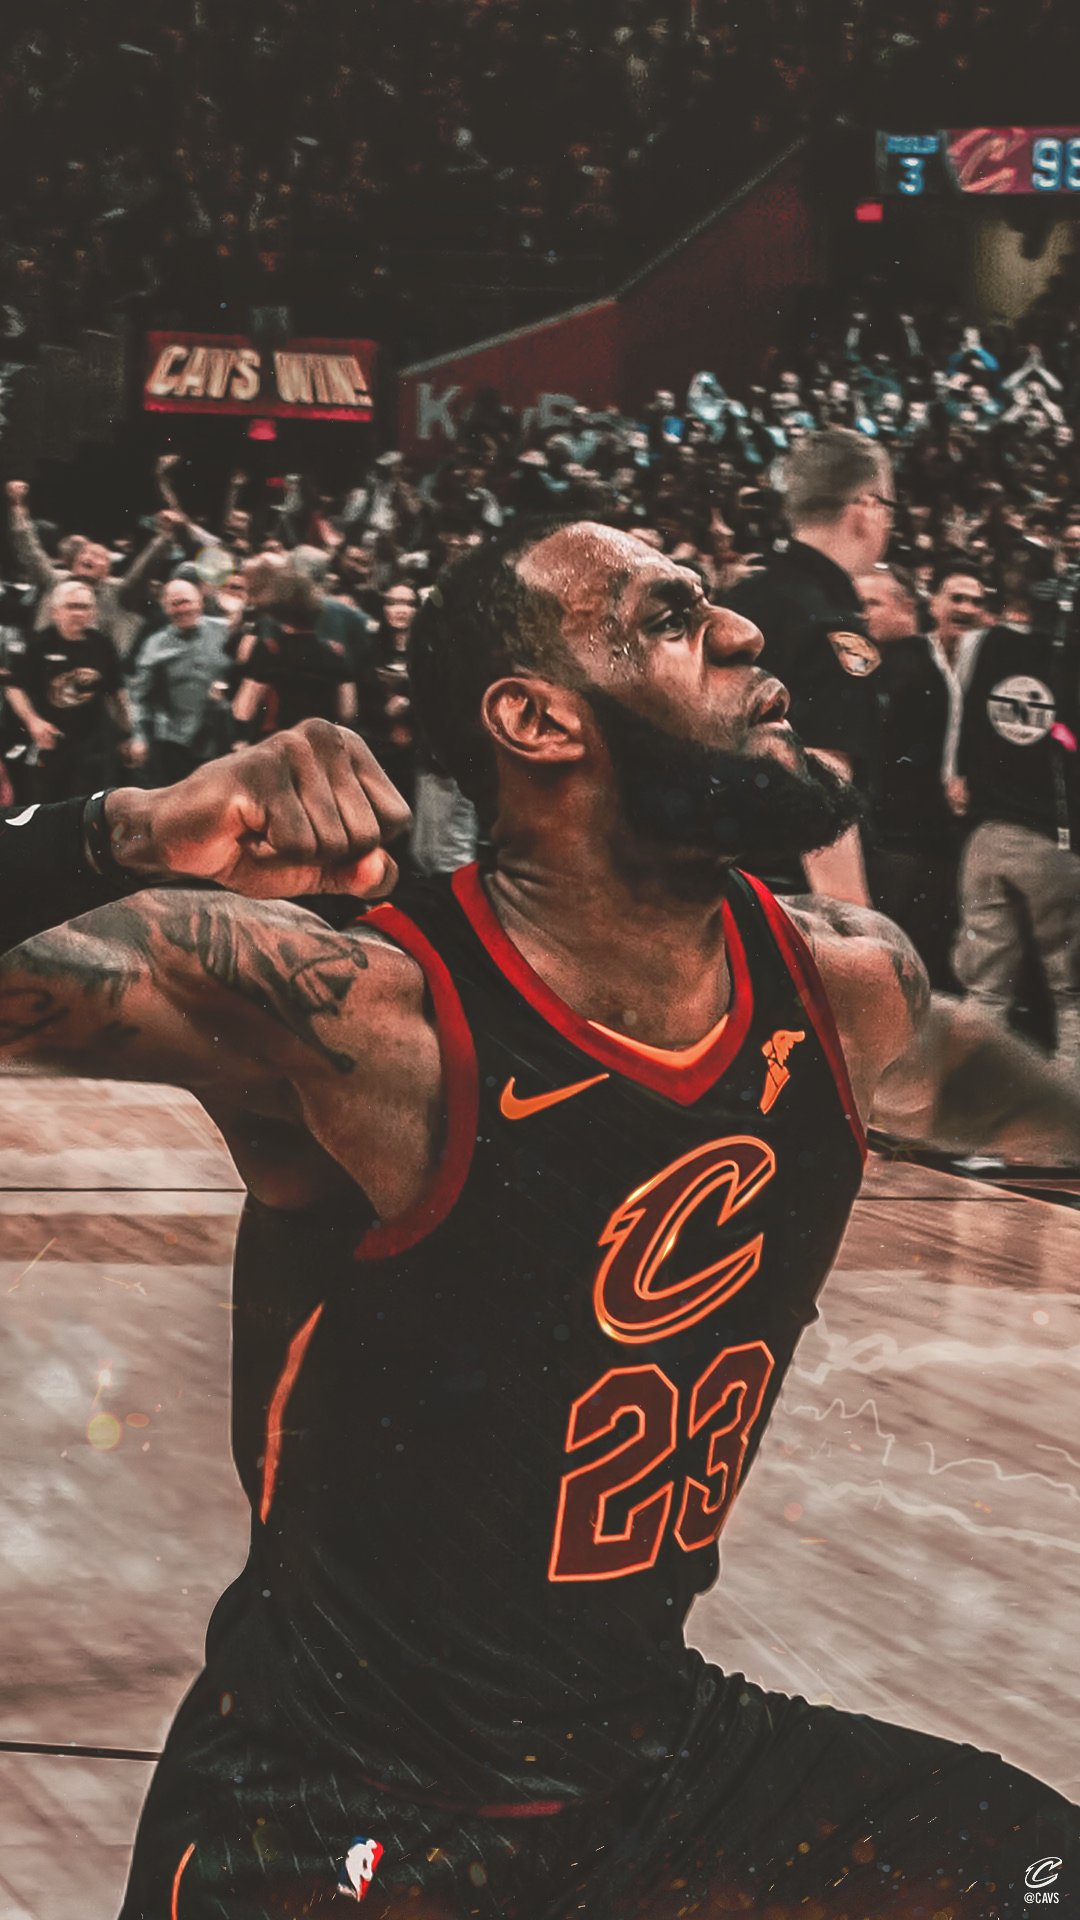 Cleveland cavaliers on when kingjames delivers we deliver new wallpapers ð whateverittakes httpstcothmuzgbtc